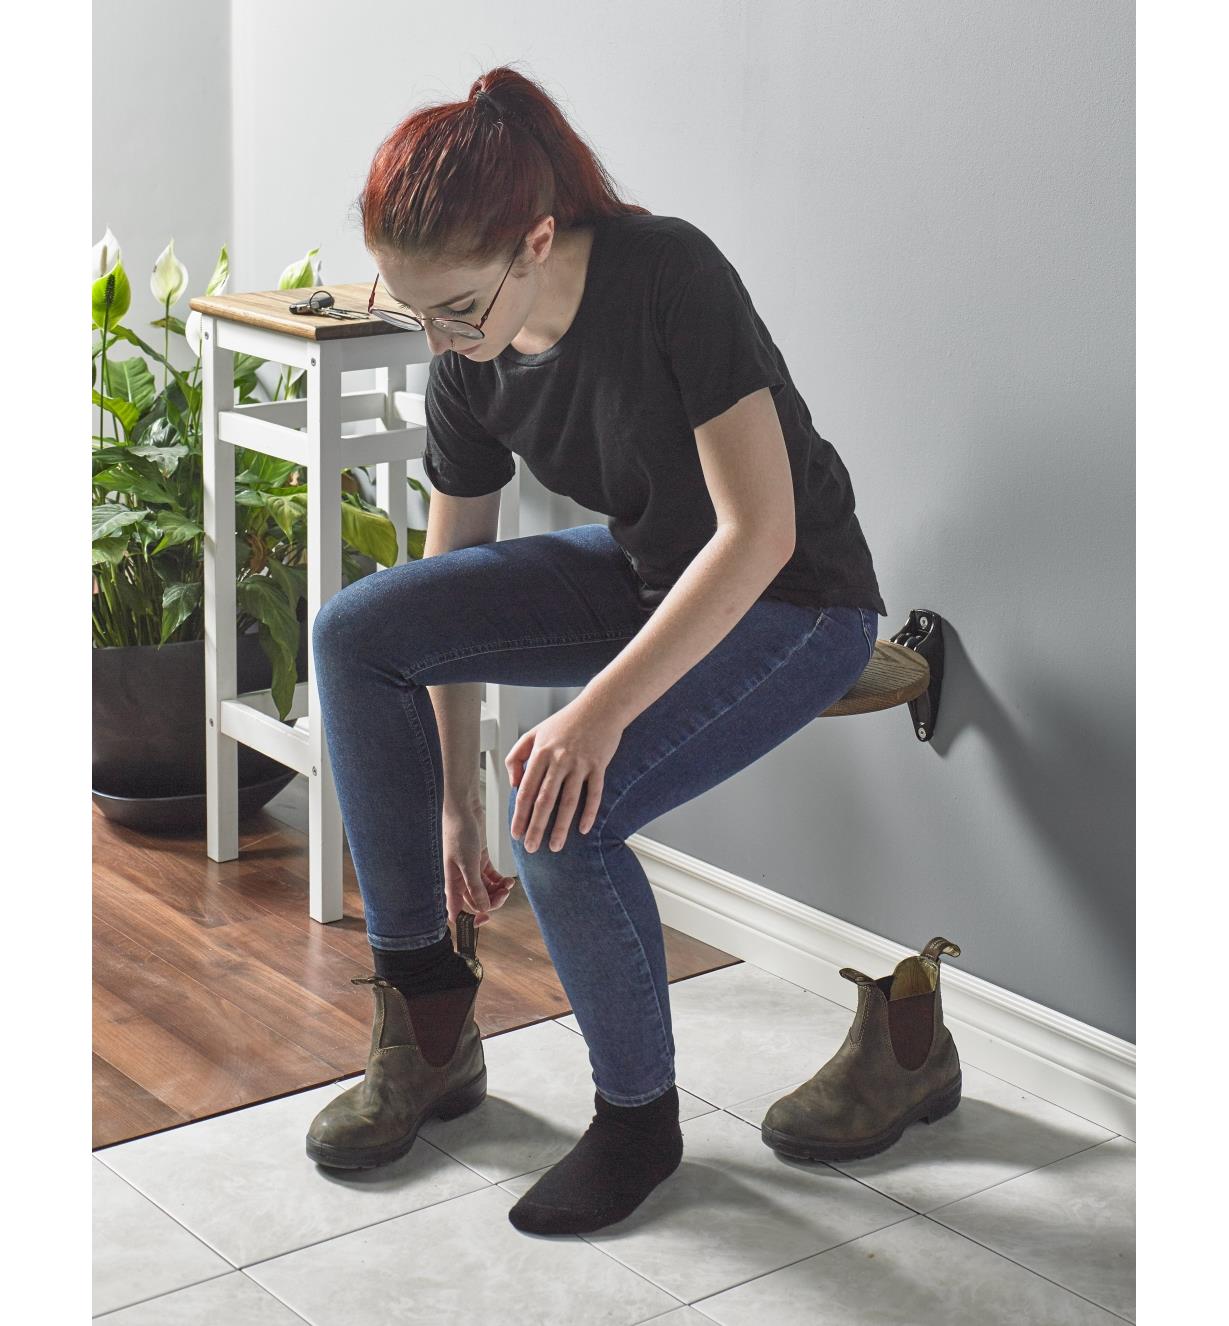 A woman sits on a hall seat while putting on boots